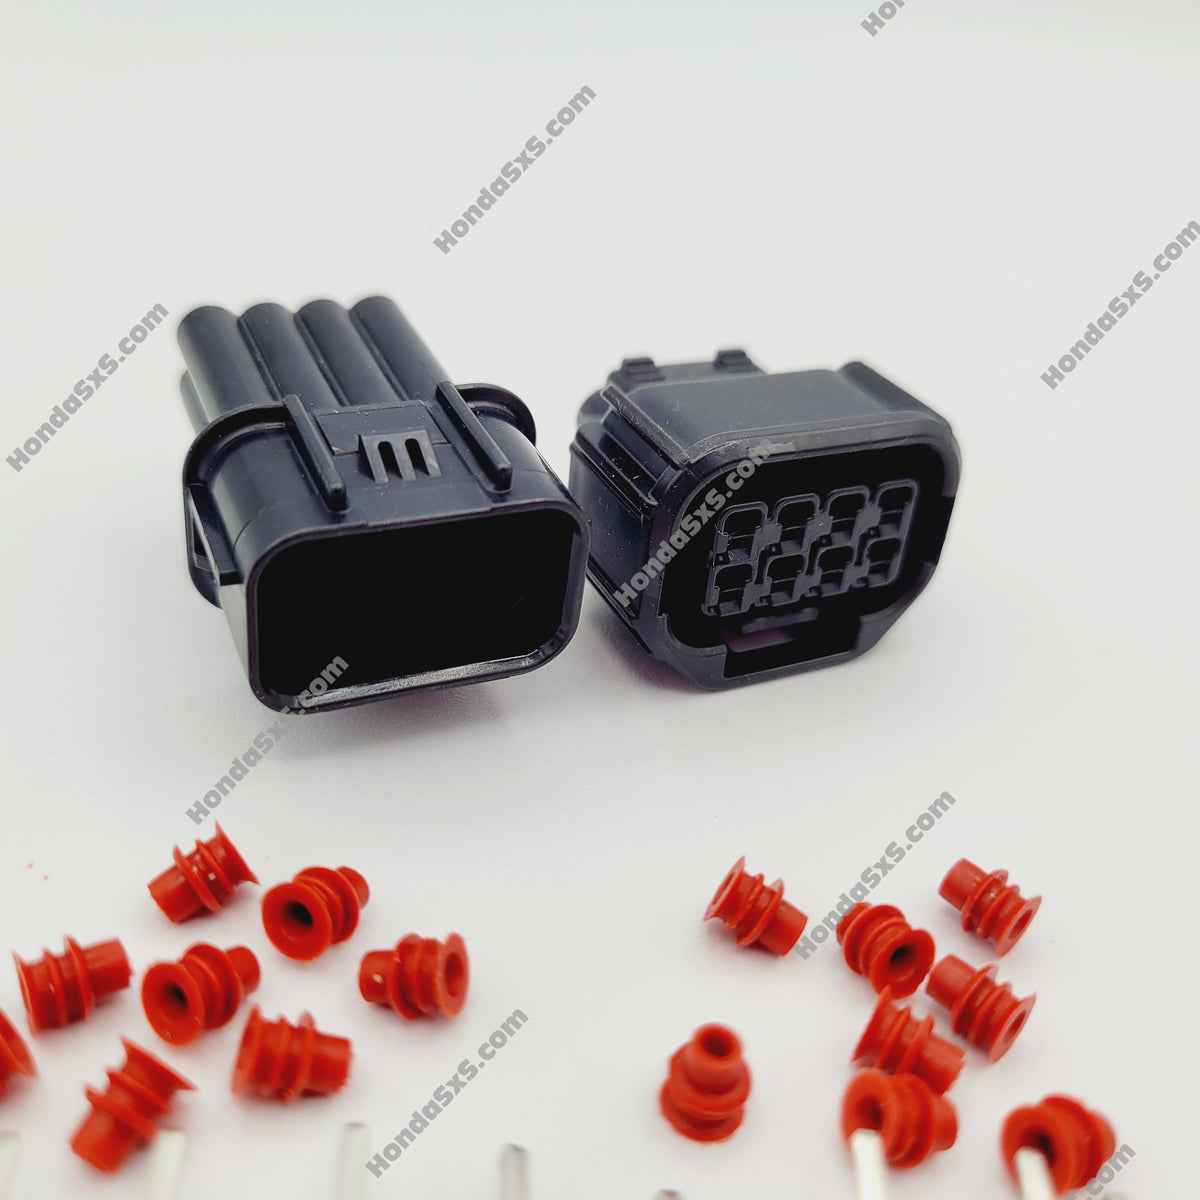 Carling 8 pin Rocker Switch Rear Block Connector Housing and Pins